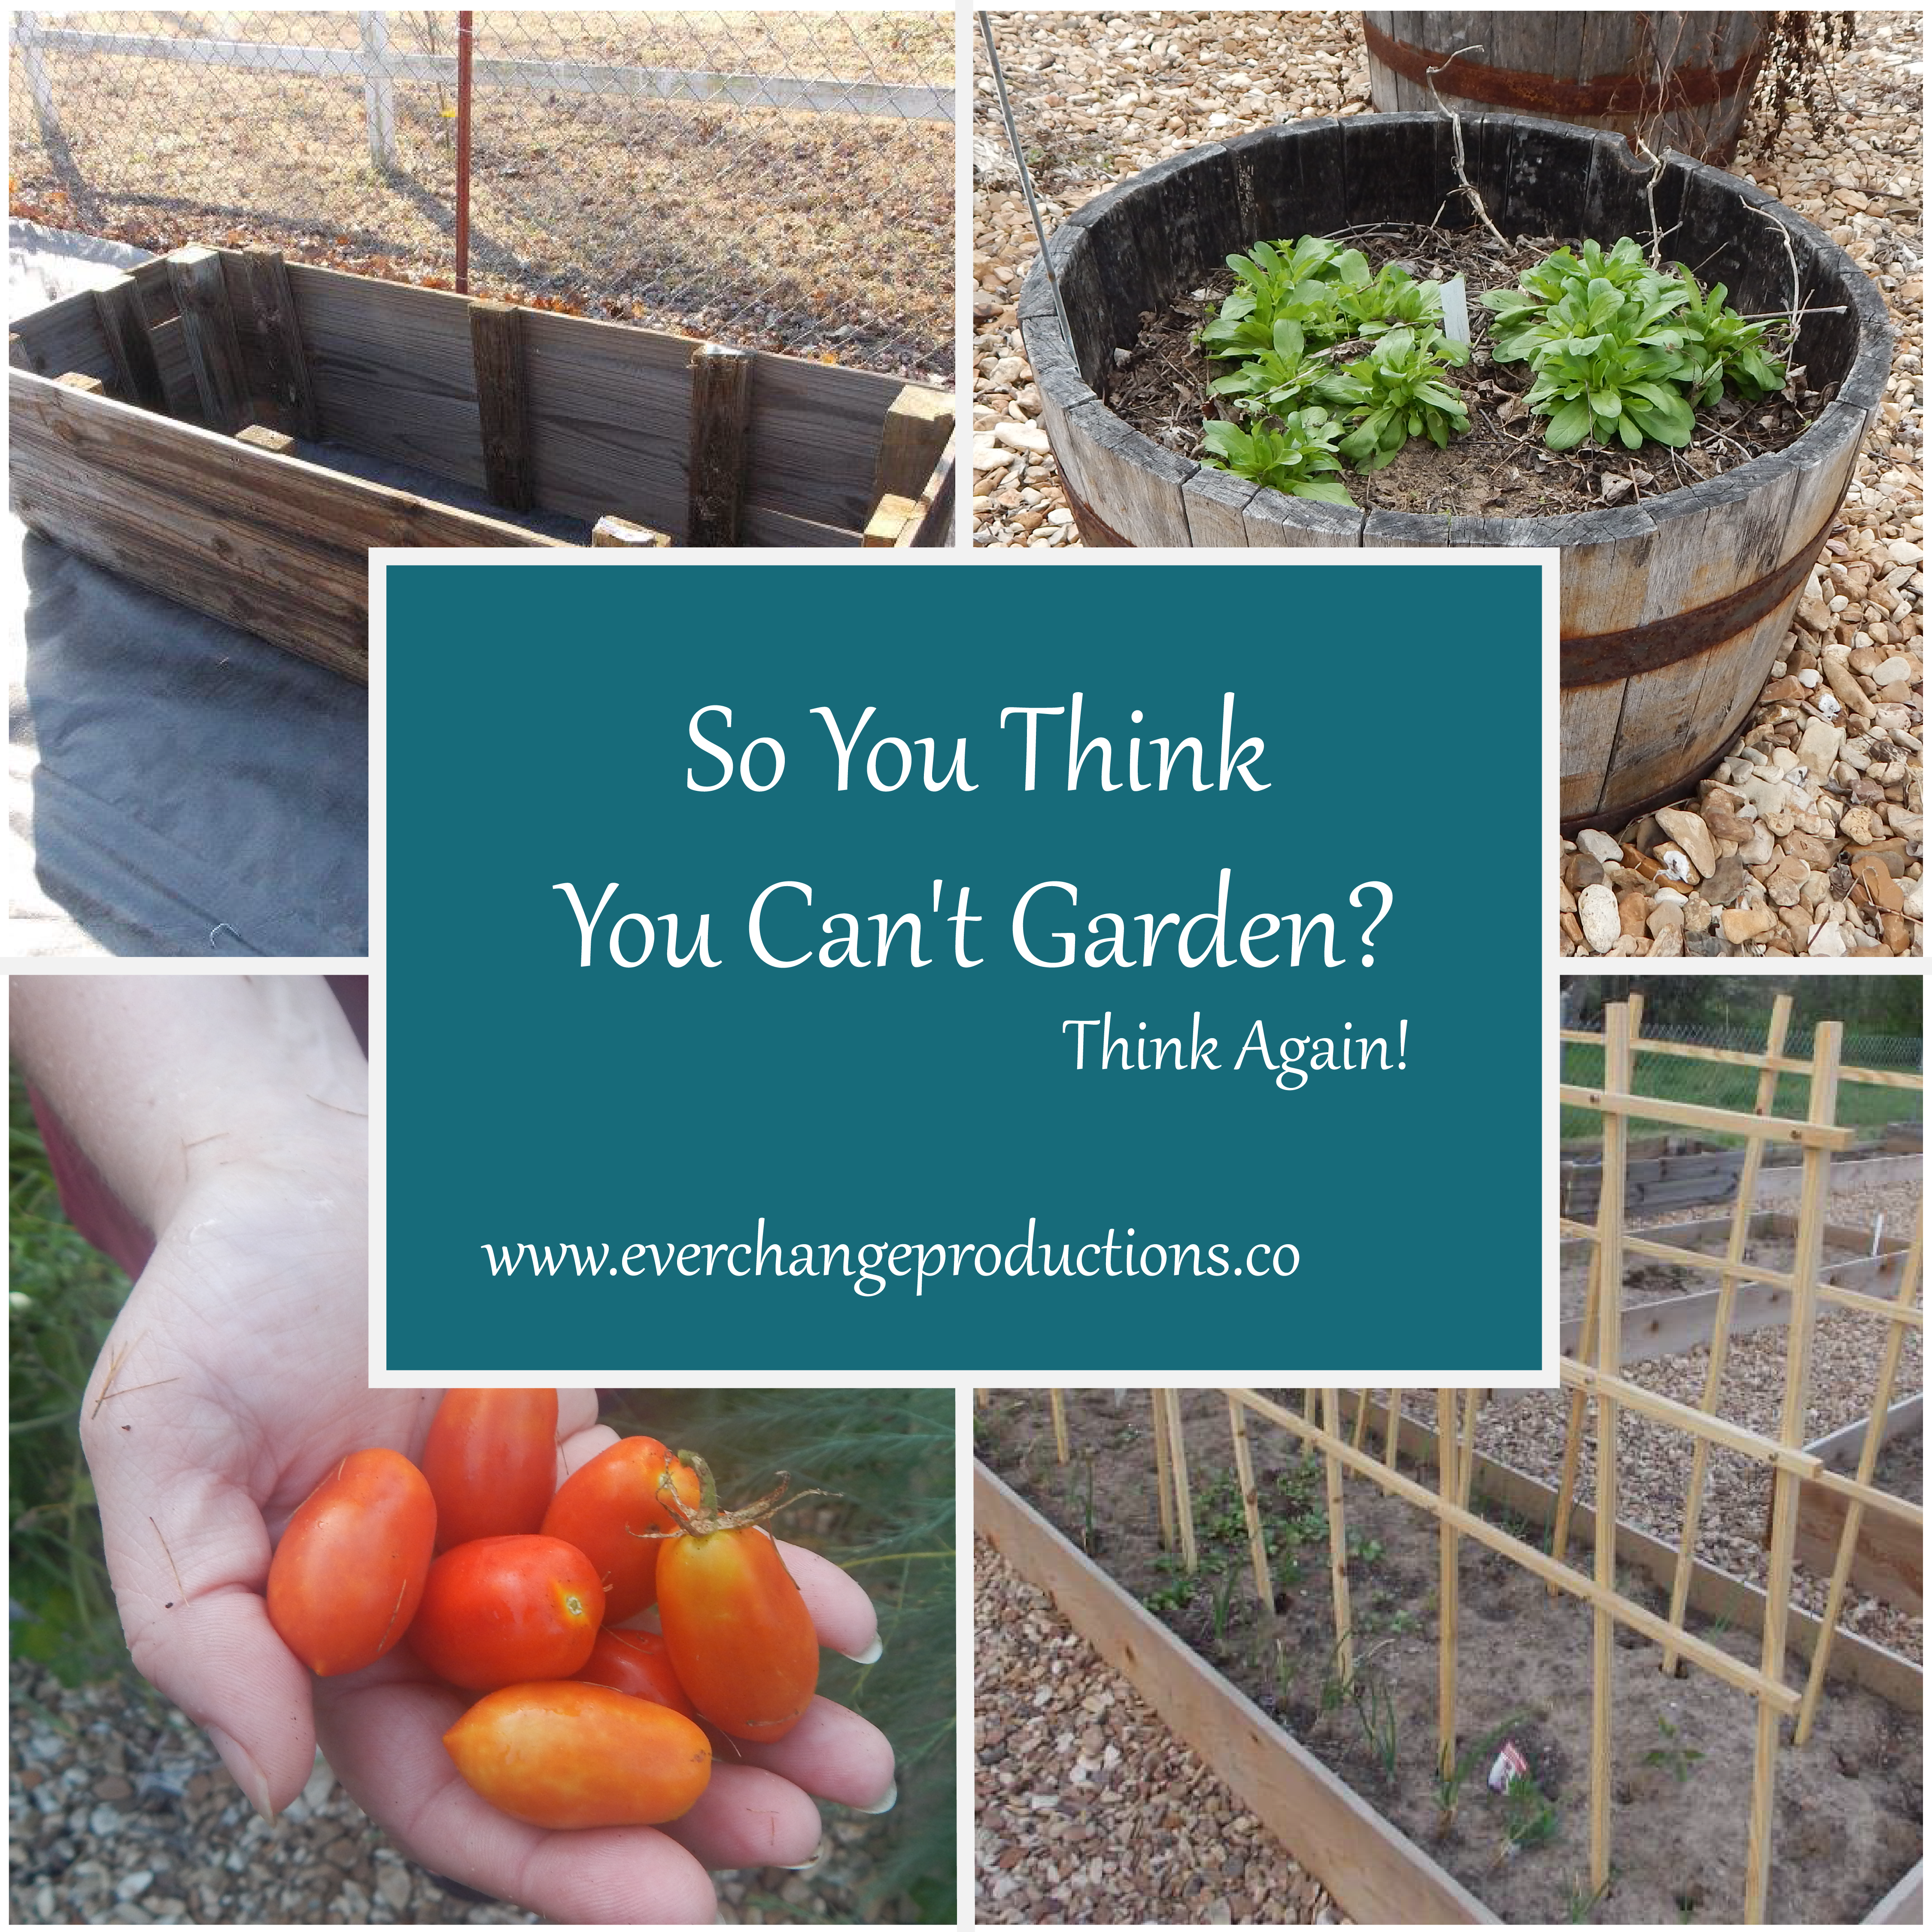 So you think you can't garden? Think again! Start slow and easy with a small space garden!